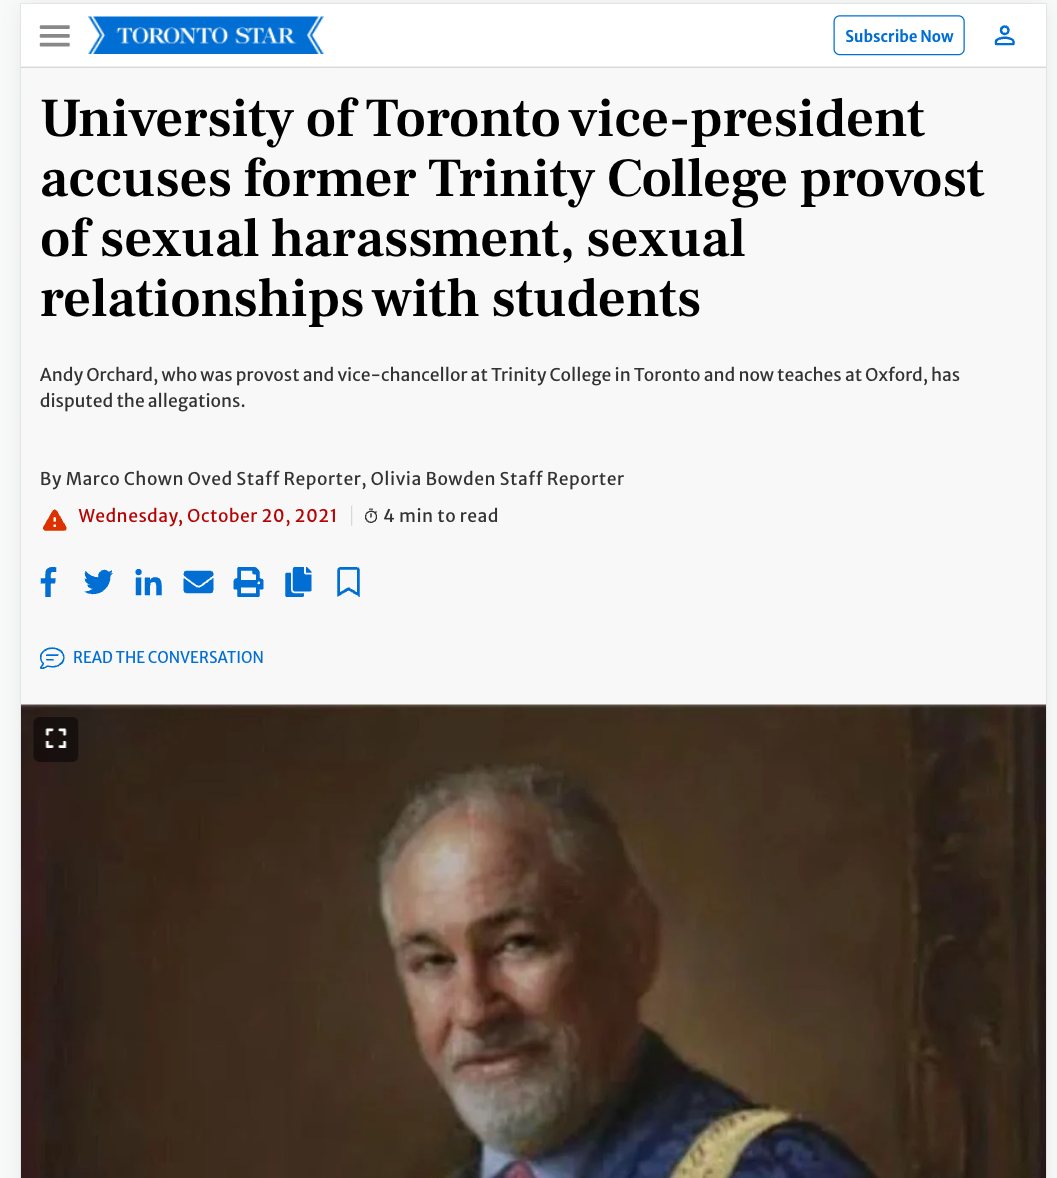 University of Toronto vice-president accuses former Trinity College provost of sexual harassment, sexual relationships with students